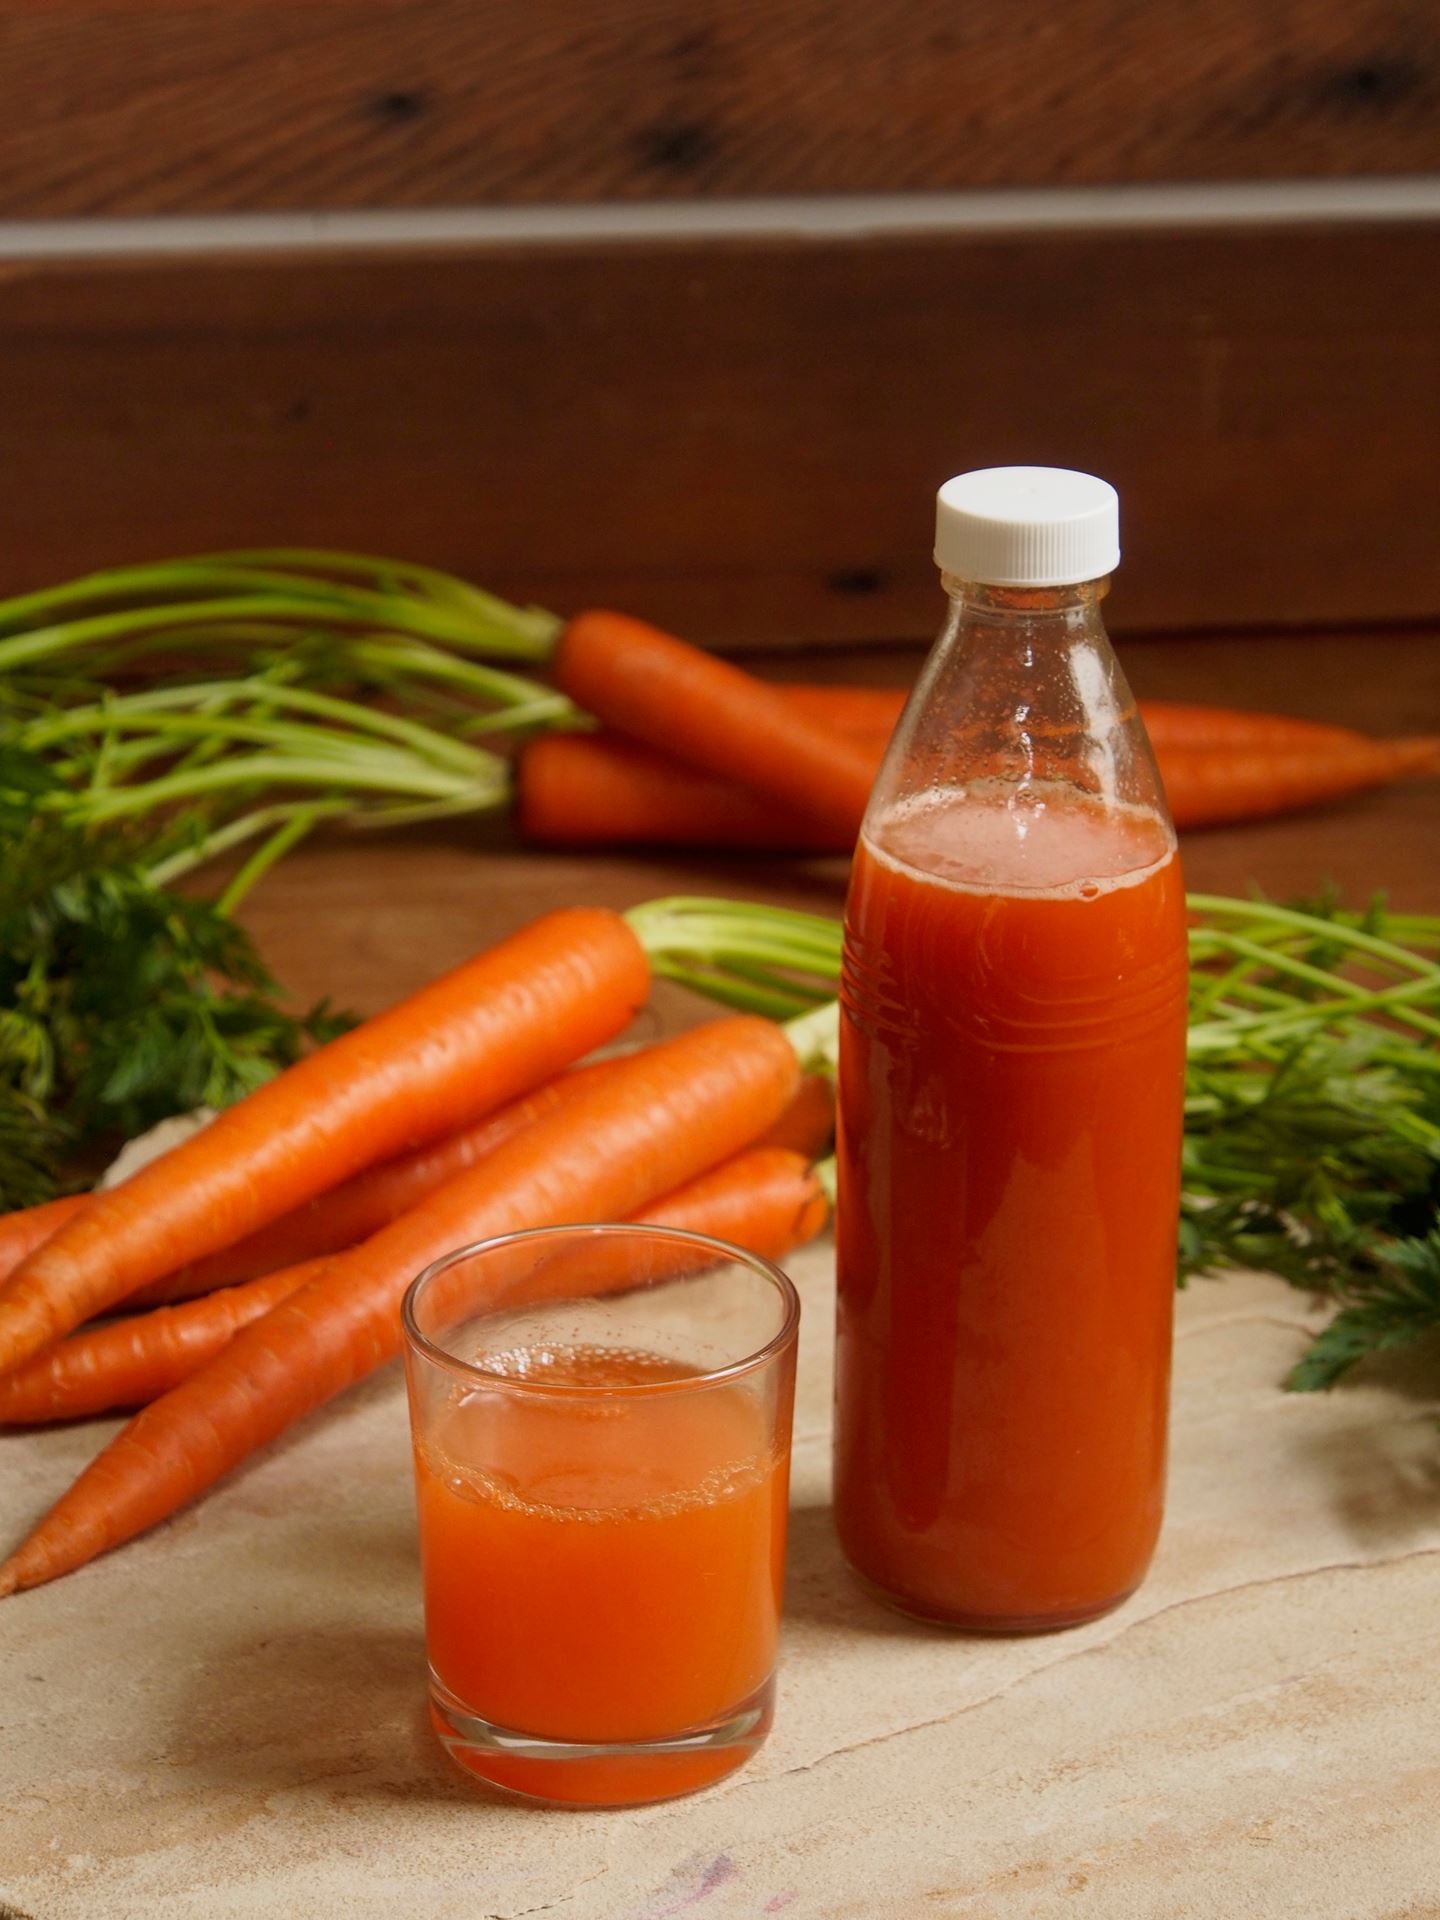 Picture of "Healthy Bones" Carrot Horseradish Shrub (concentrate)